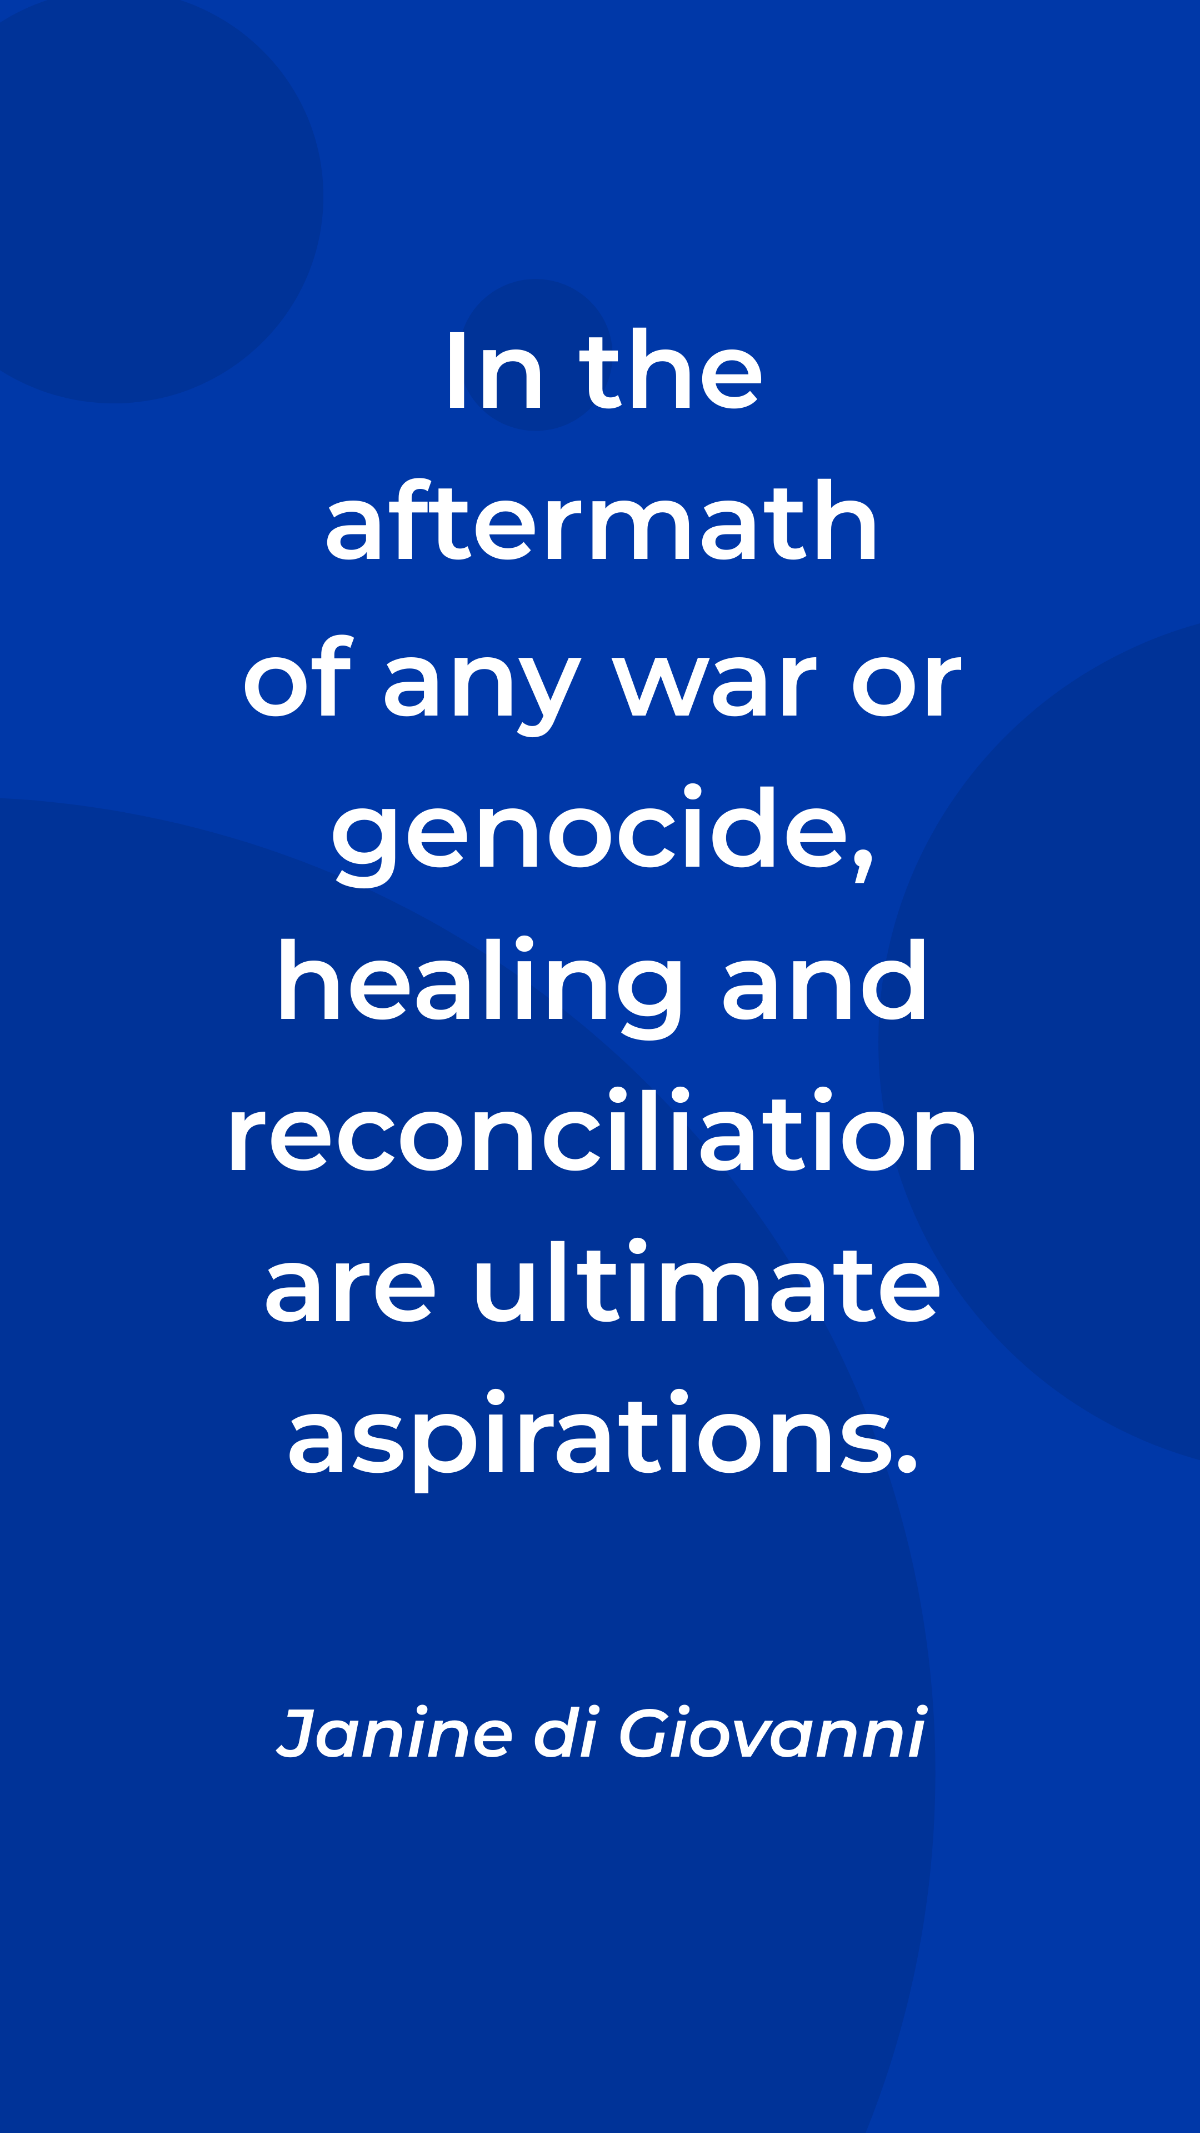 Janine di Giovanni - In the aftermath of any war or genocide, healing and reconciliation are ultimate aspirations. Template